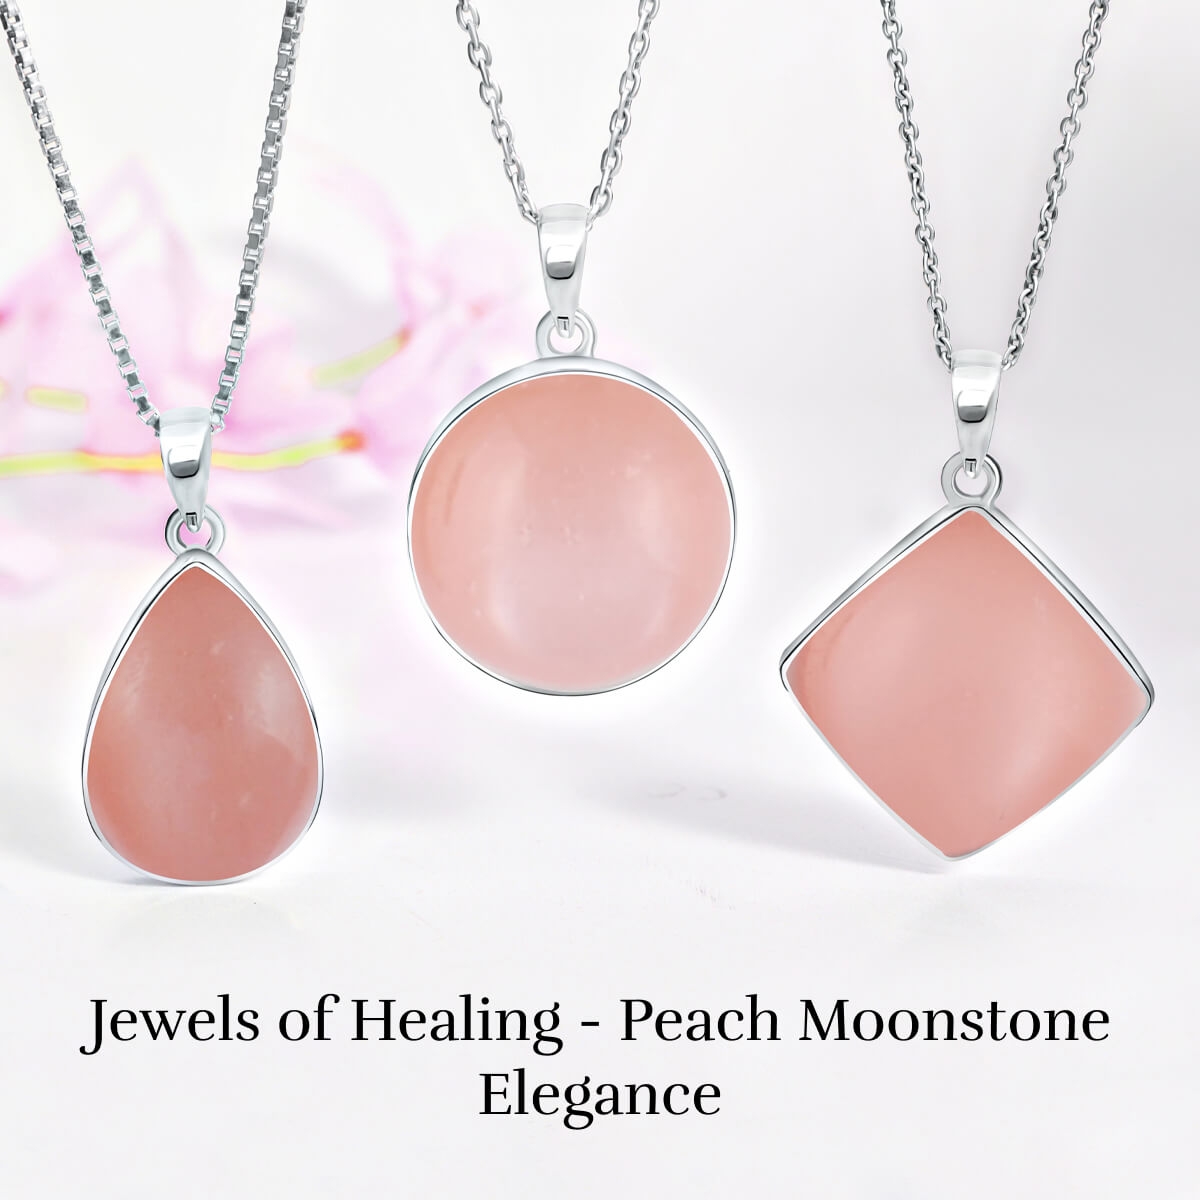 Heal Yourself Physically & Emotionally By Wearing Peach Moonstone Jewelry